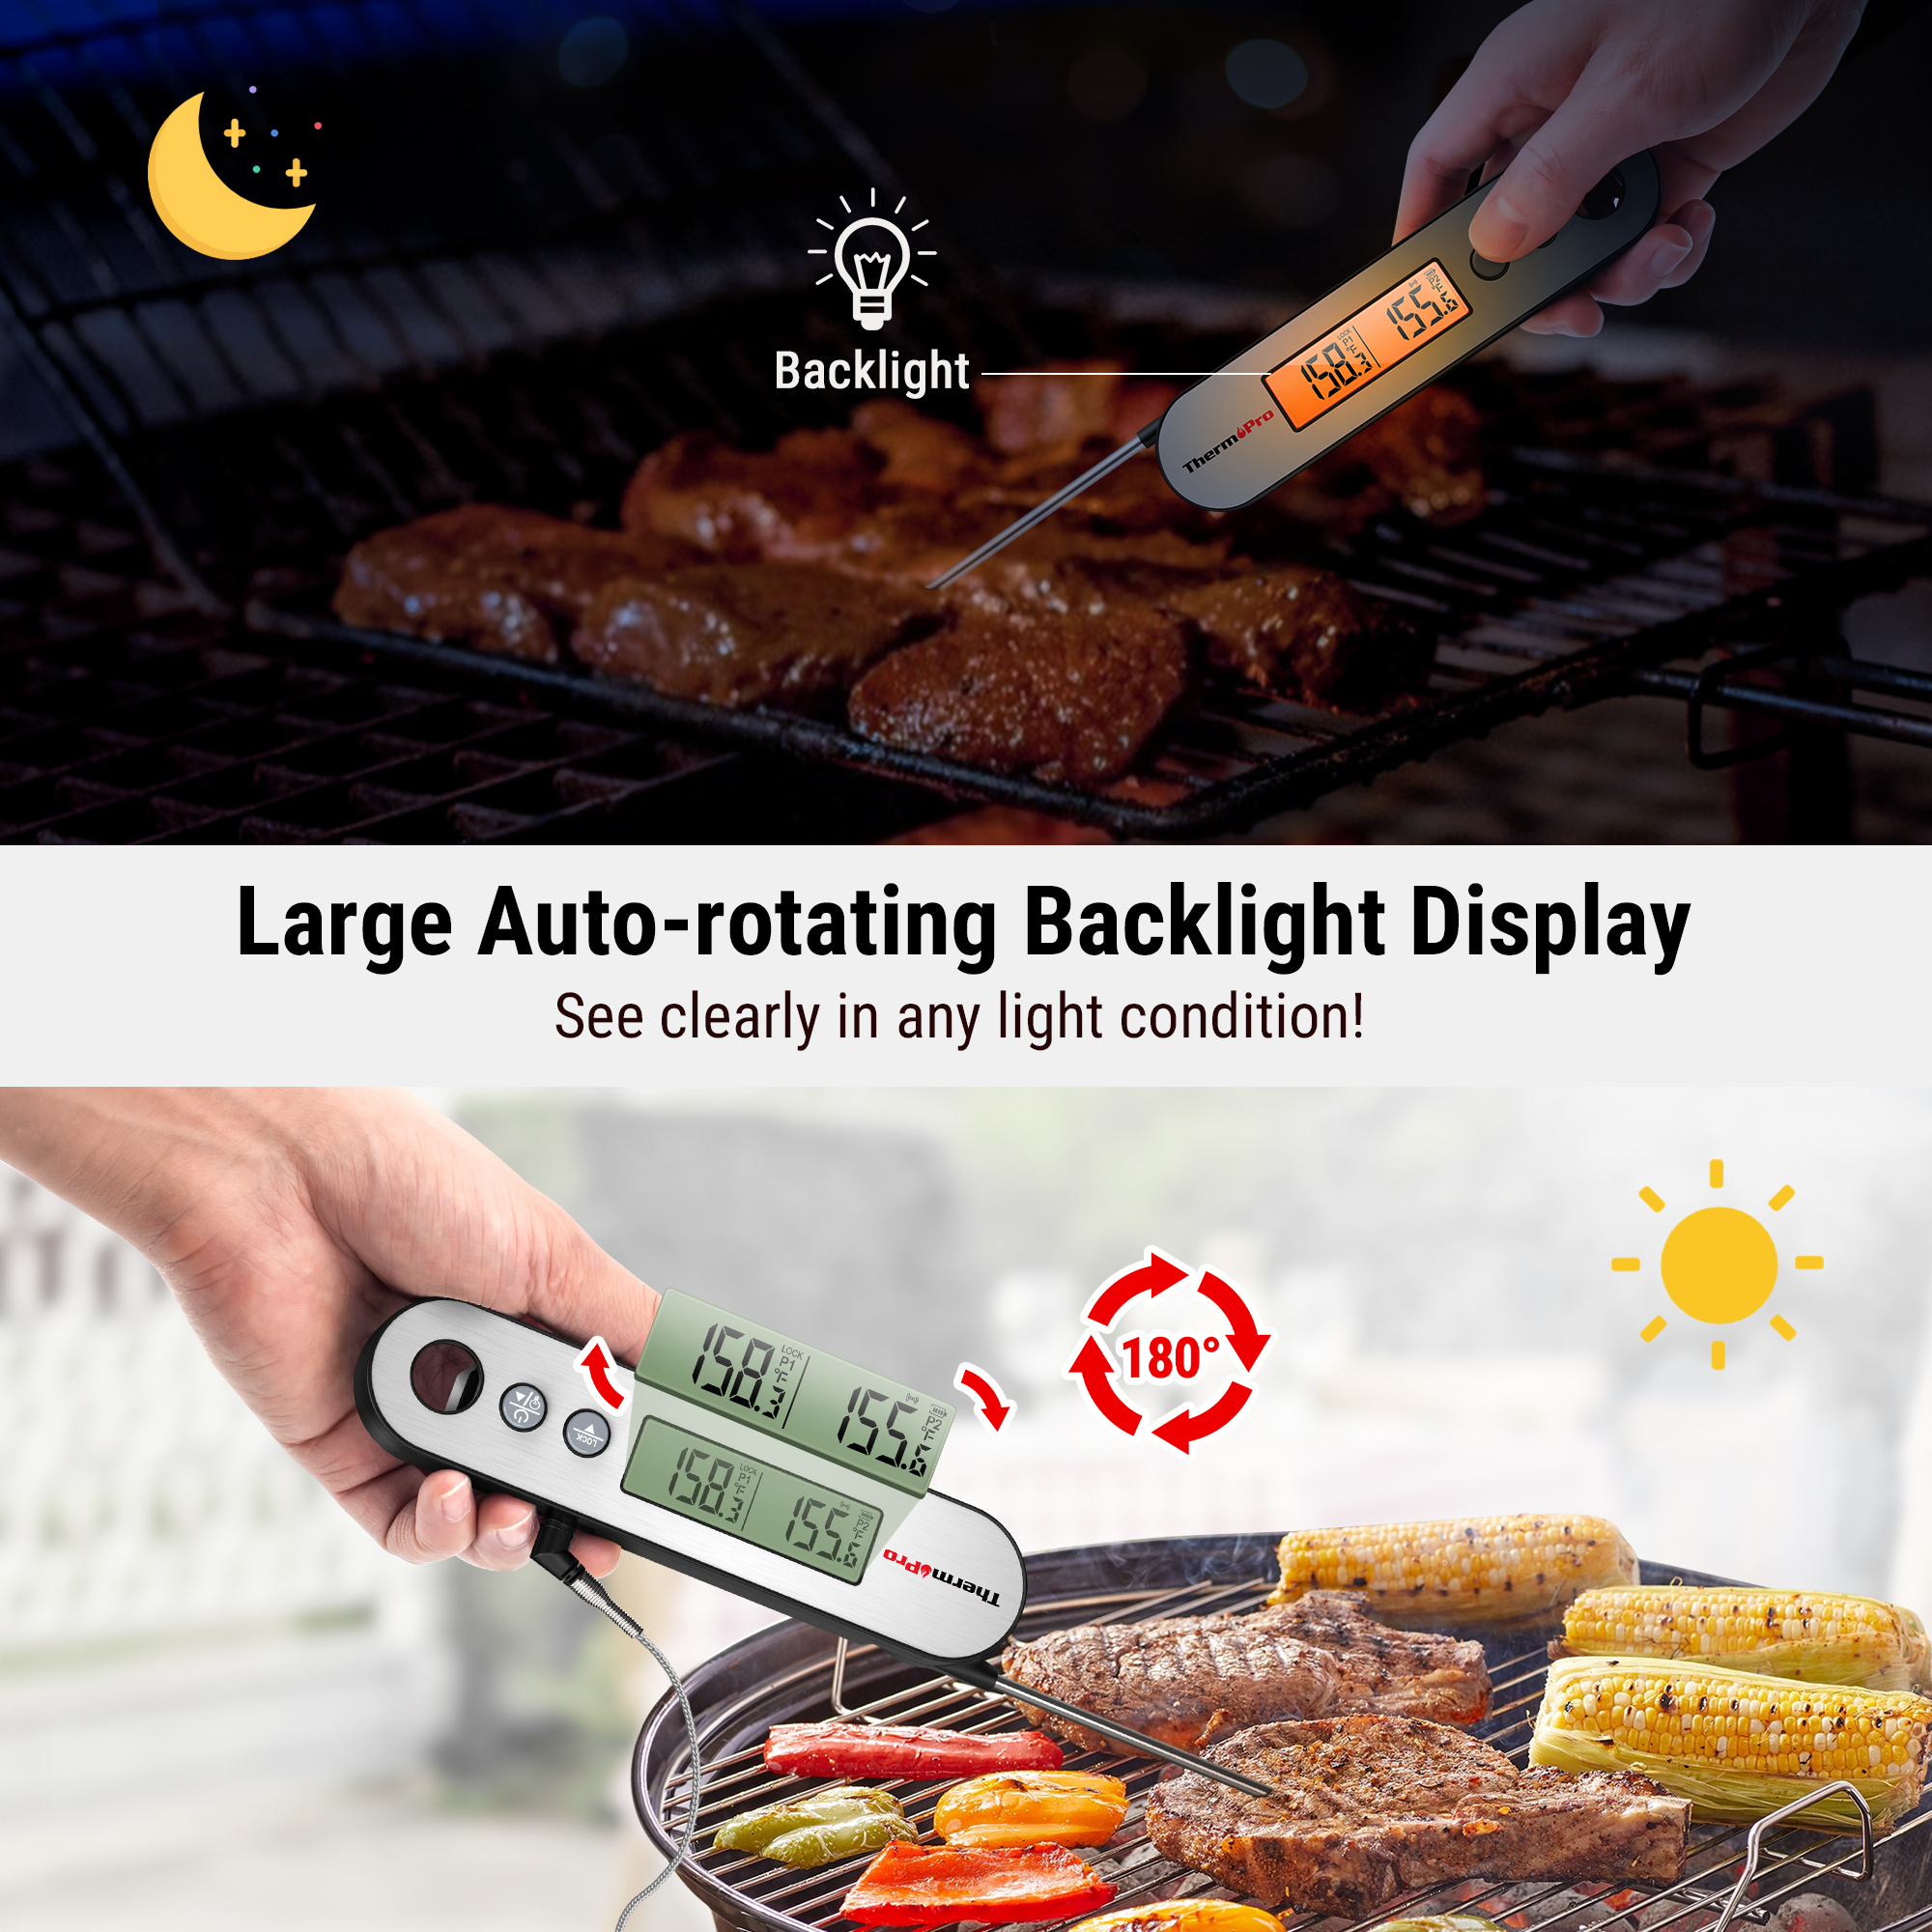 ThermoPro Waterproof Dual Probe Meat Thermometer with Alarm